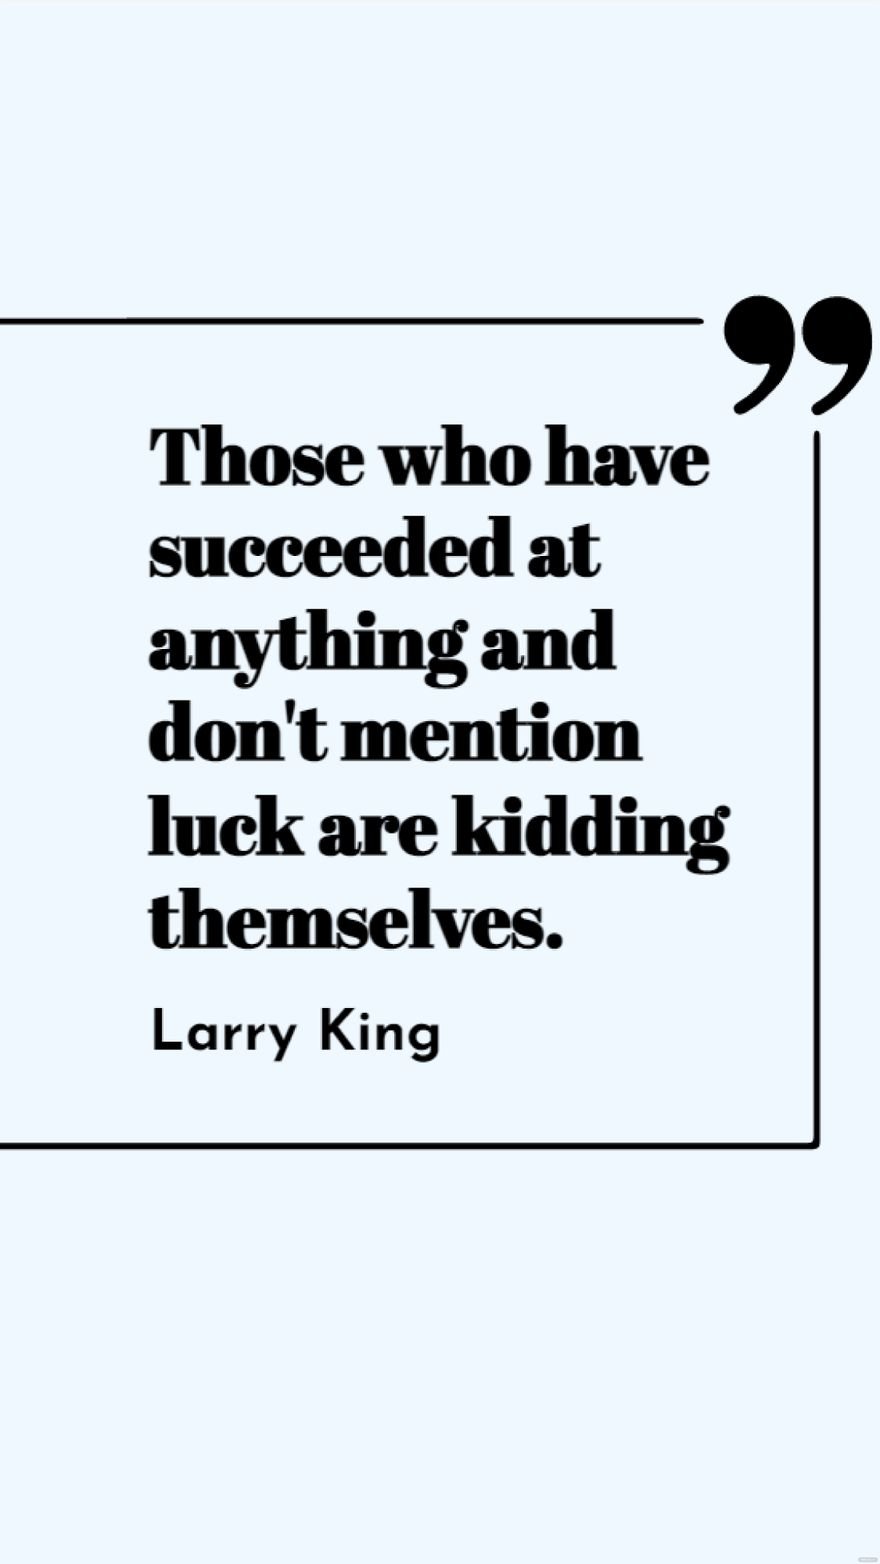 Free Larry King - Those who have succeeded at anything and don't mention luck are kidding themselves. in JPG